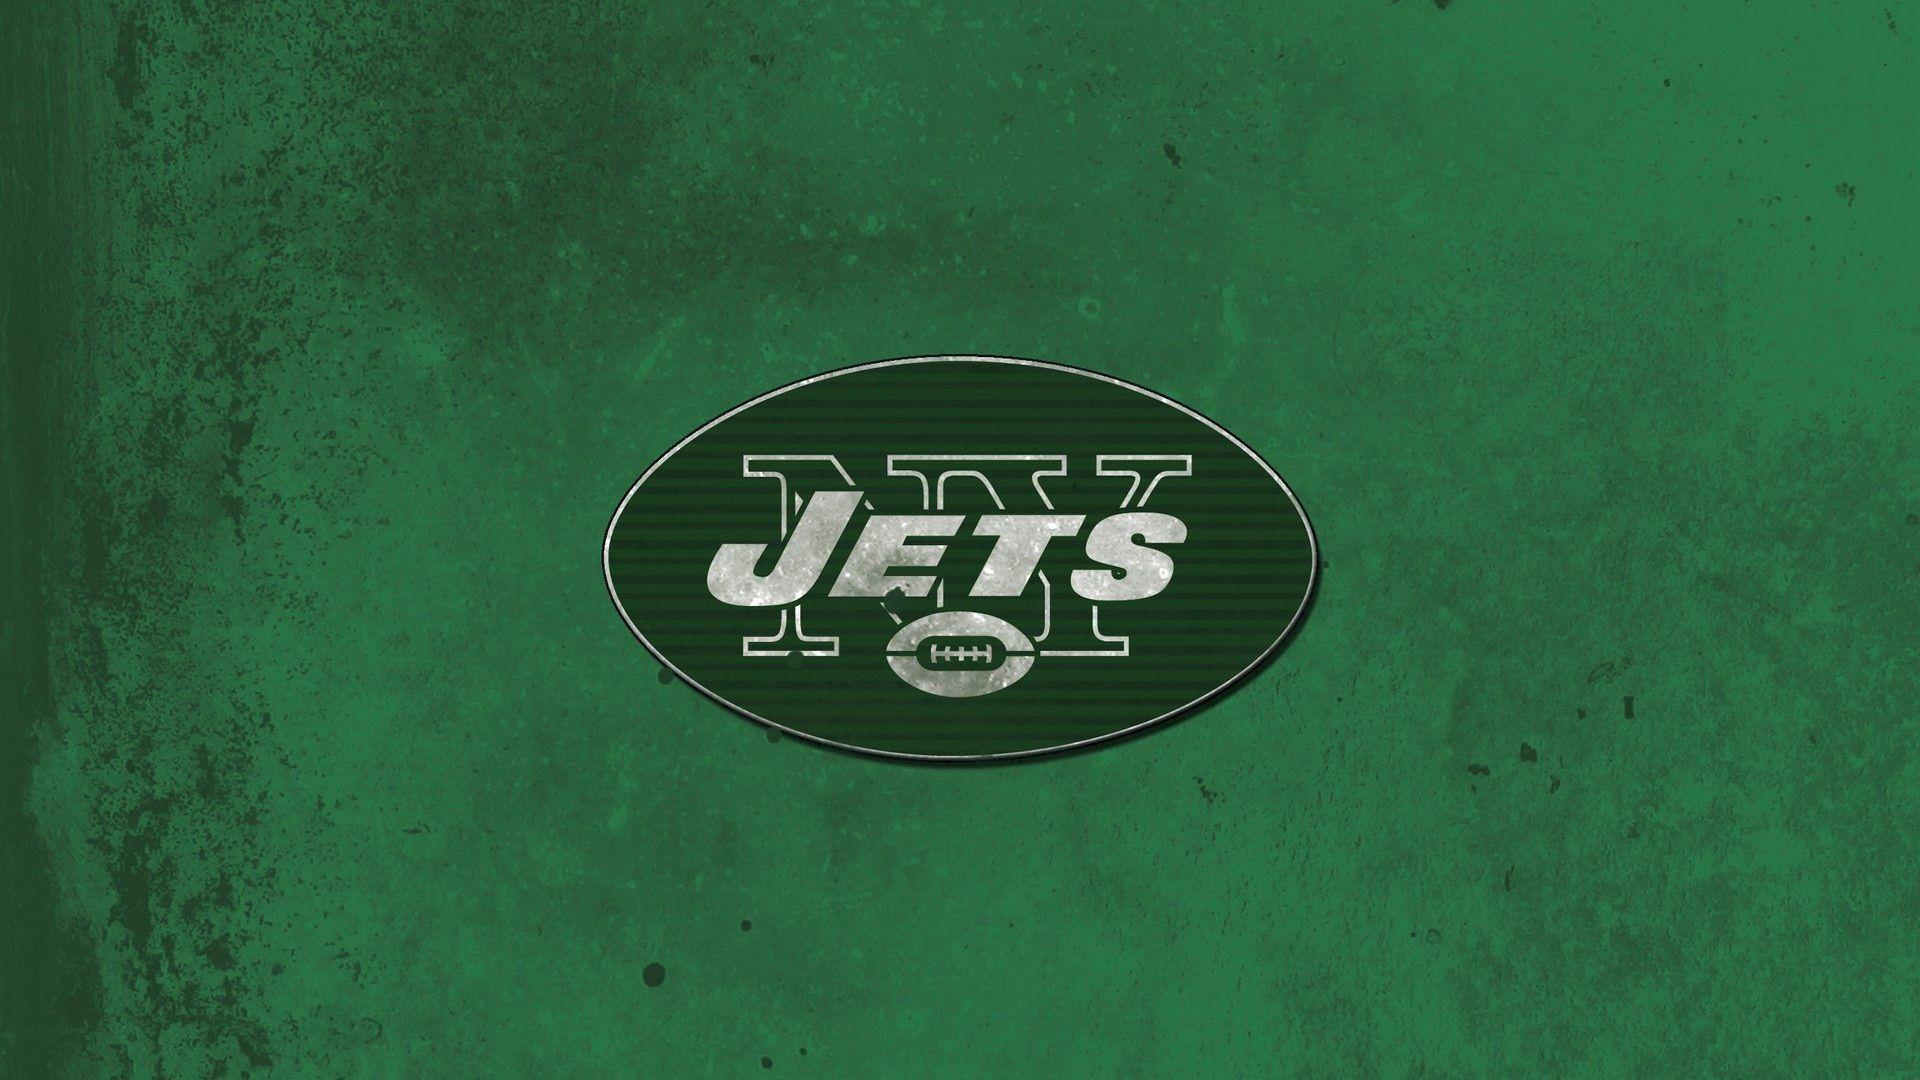 New York Jets Wallpapers - Top 30 Best New York Jets Wallpapers Download